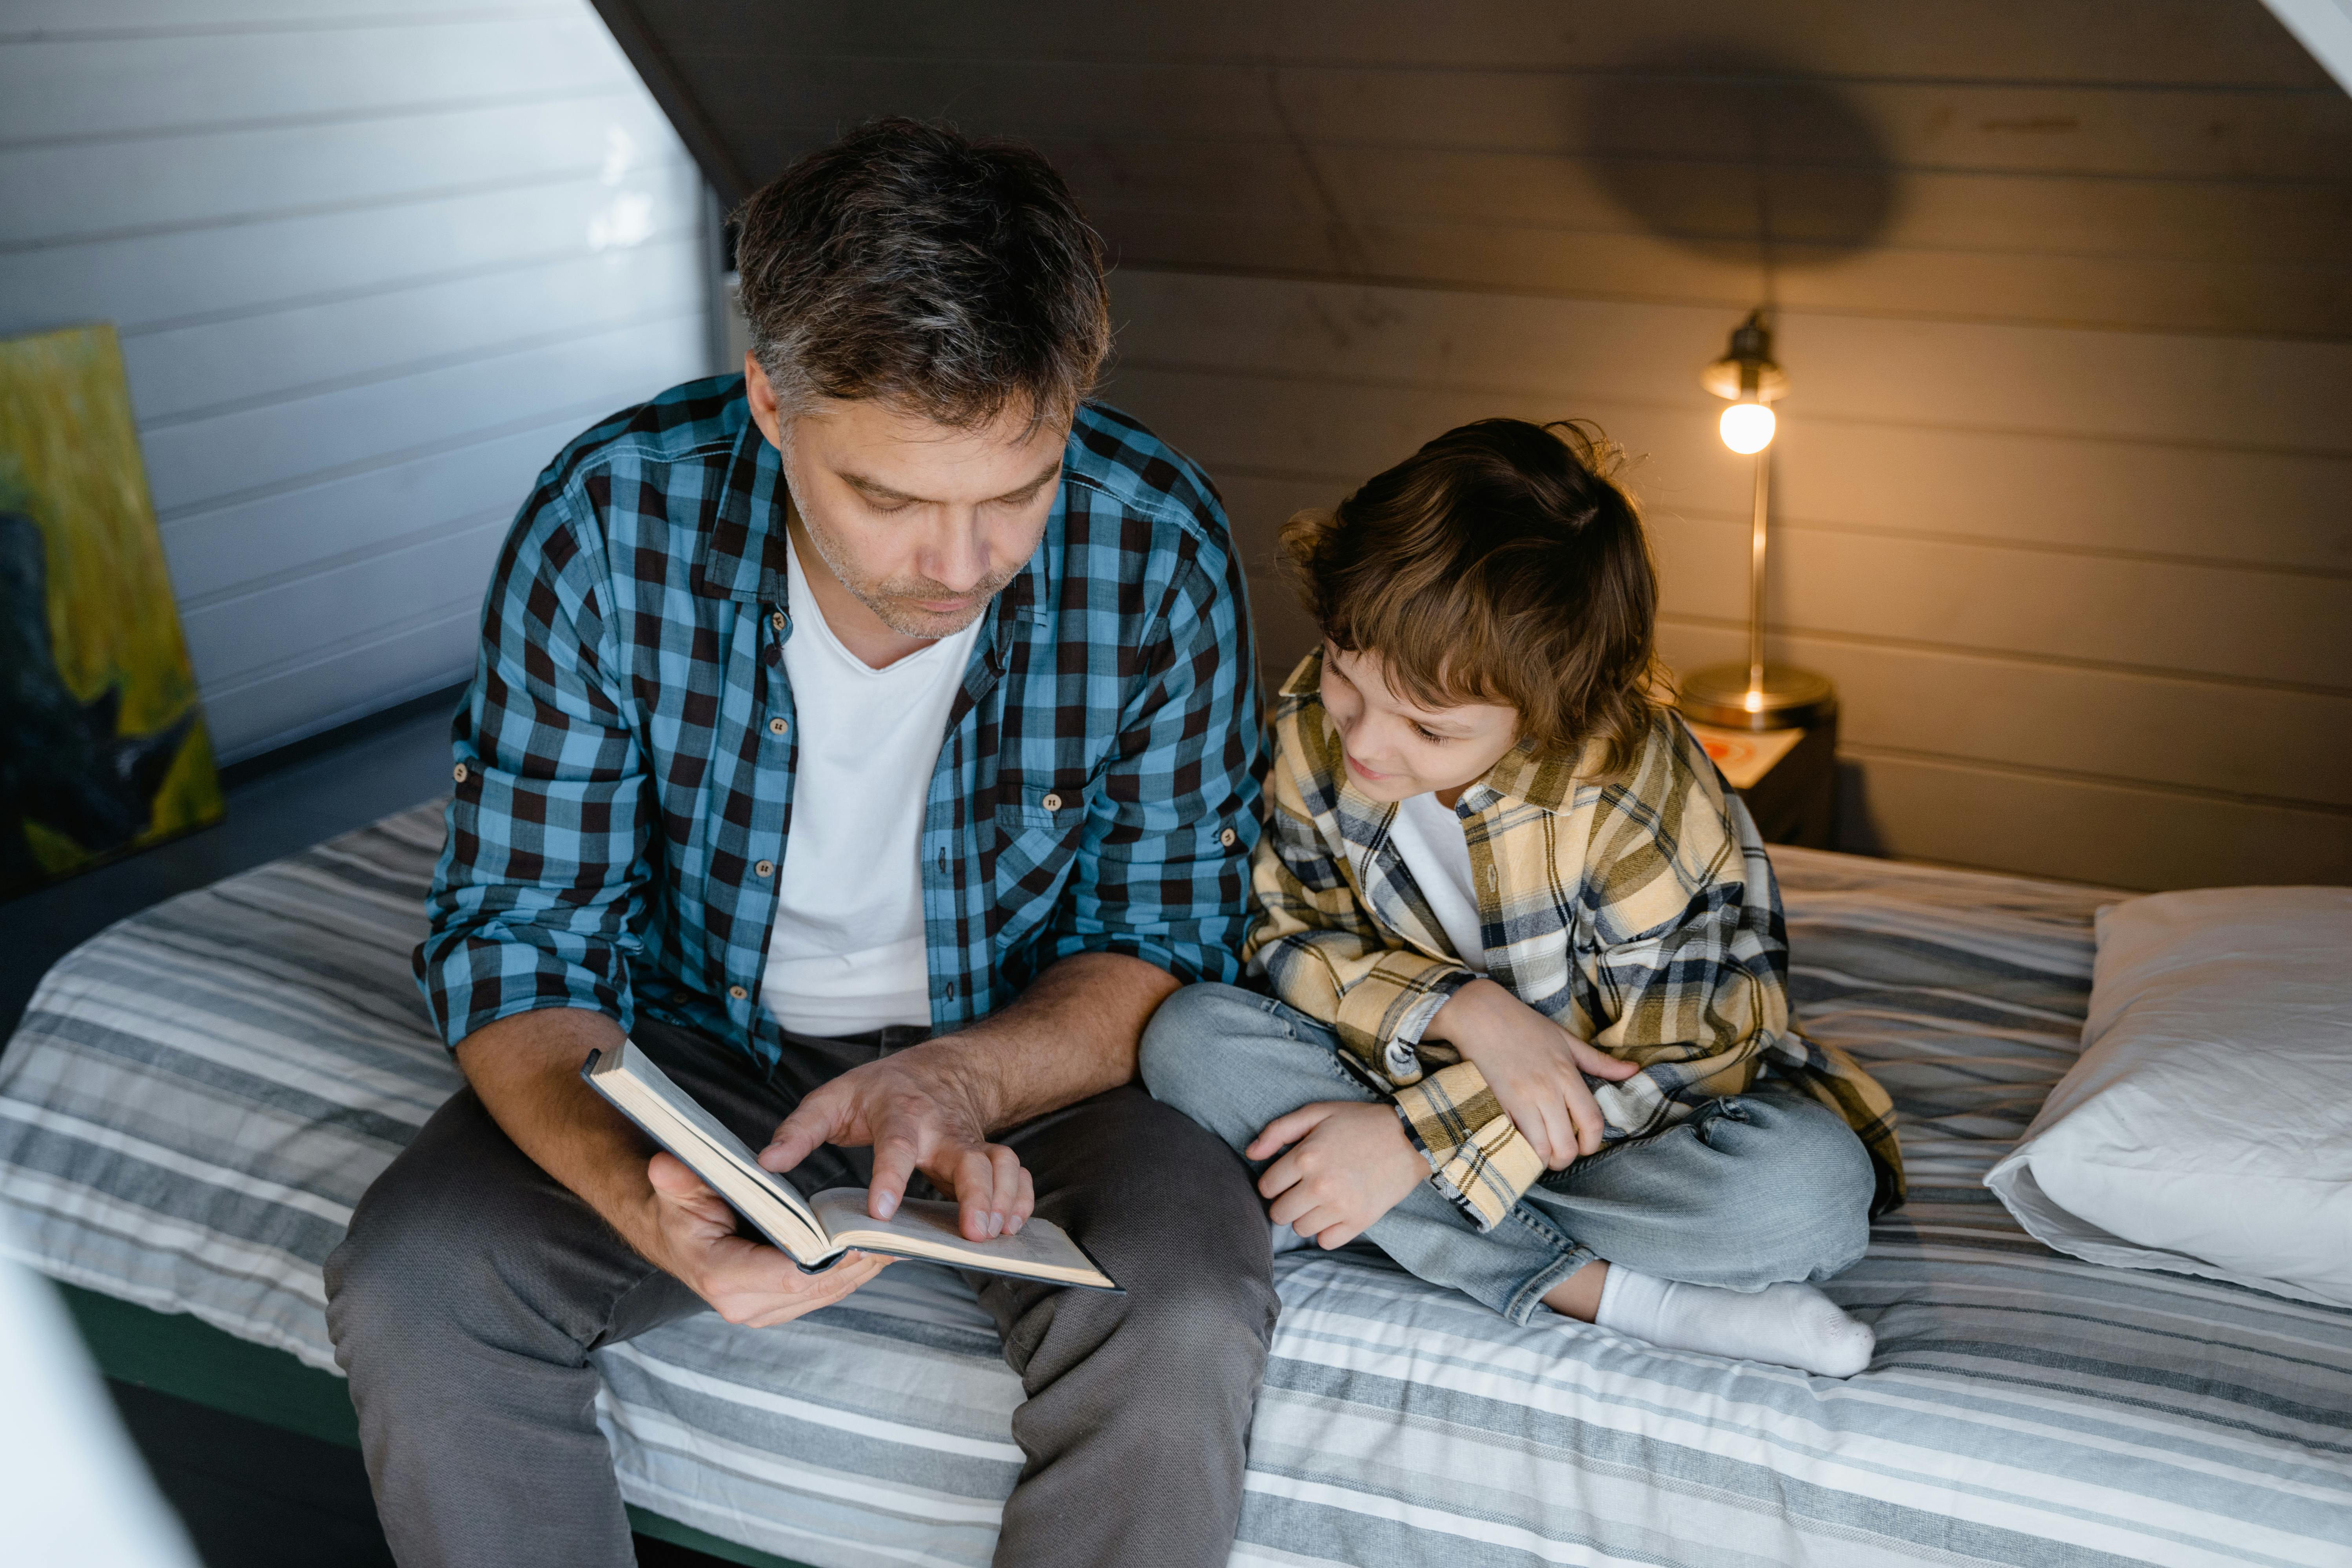 A man reads to a boy sitting together on a bed | Source: Pexels